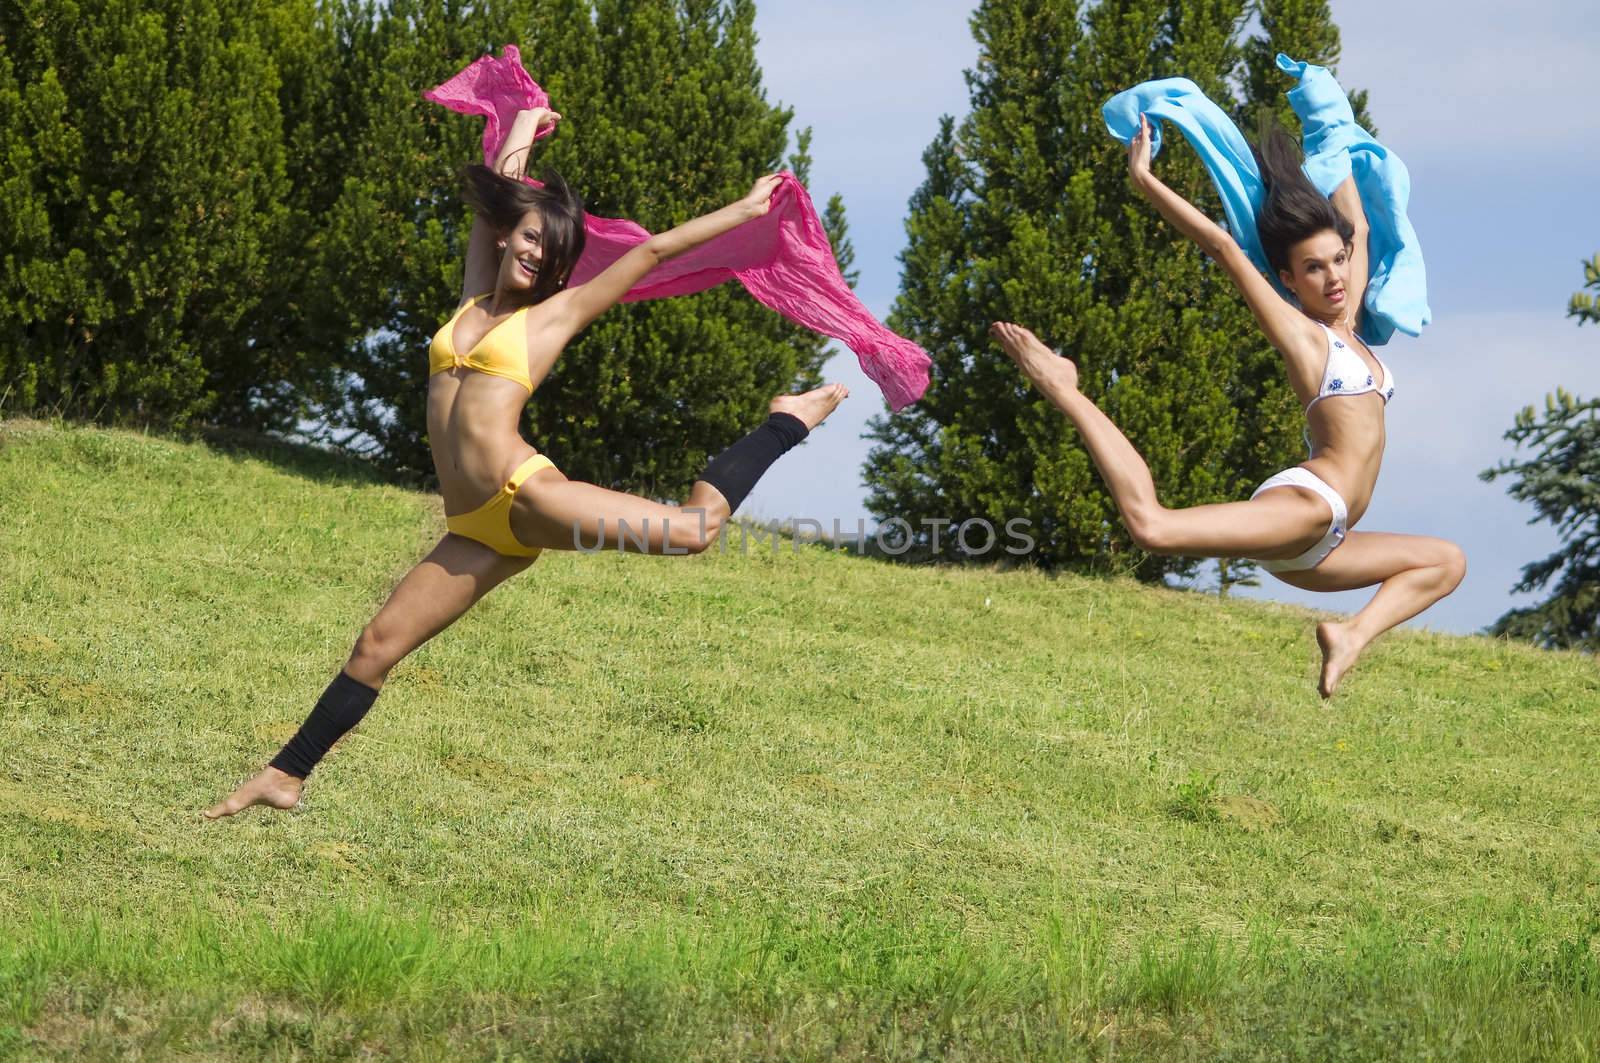 two great girls jumping tougheter in a field with pink and blue scarfe